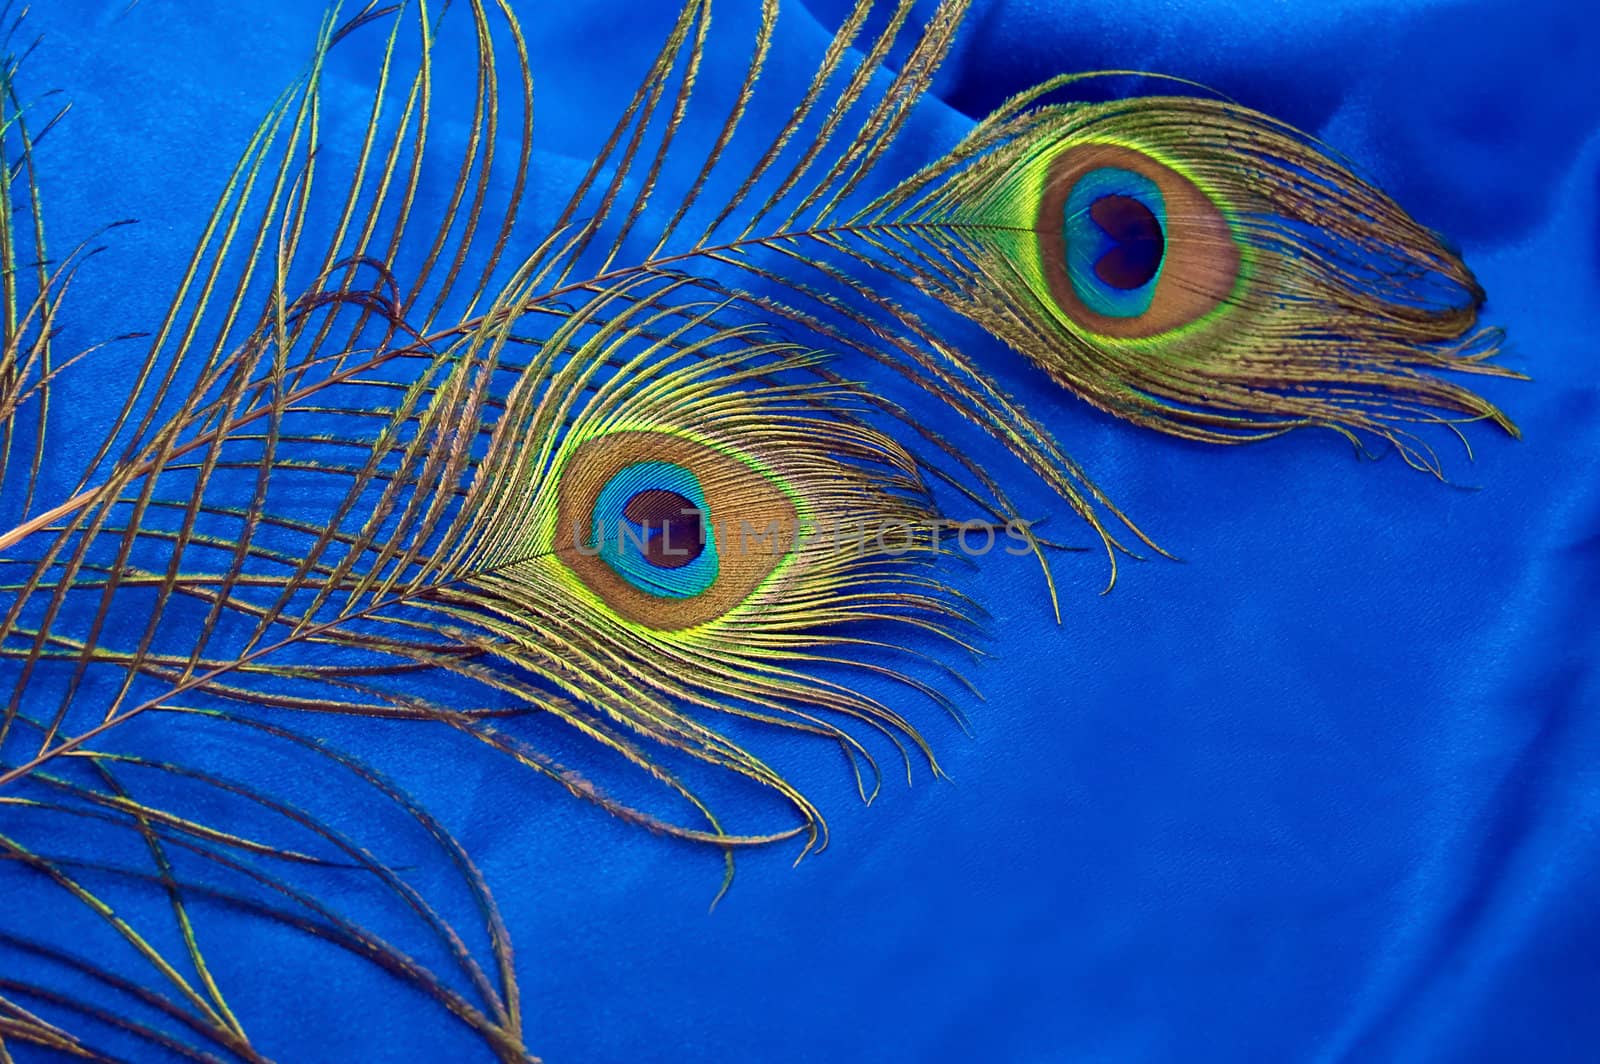 Two peacock feathers on blue satin background